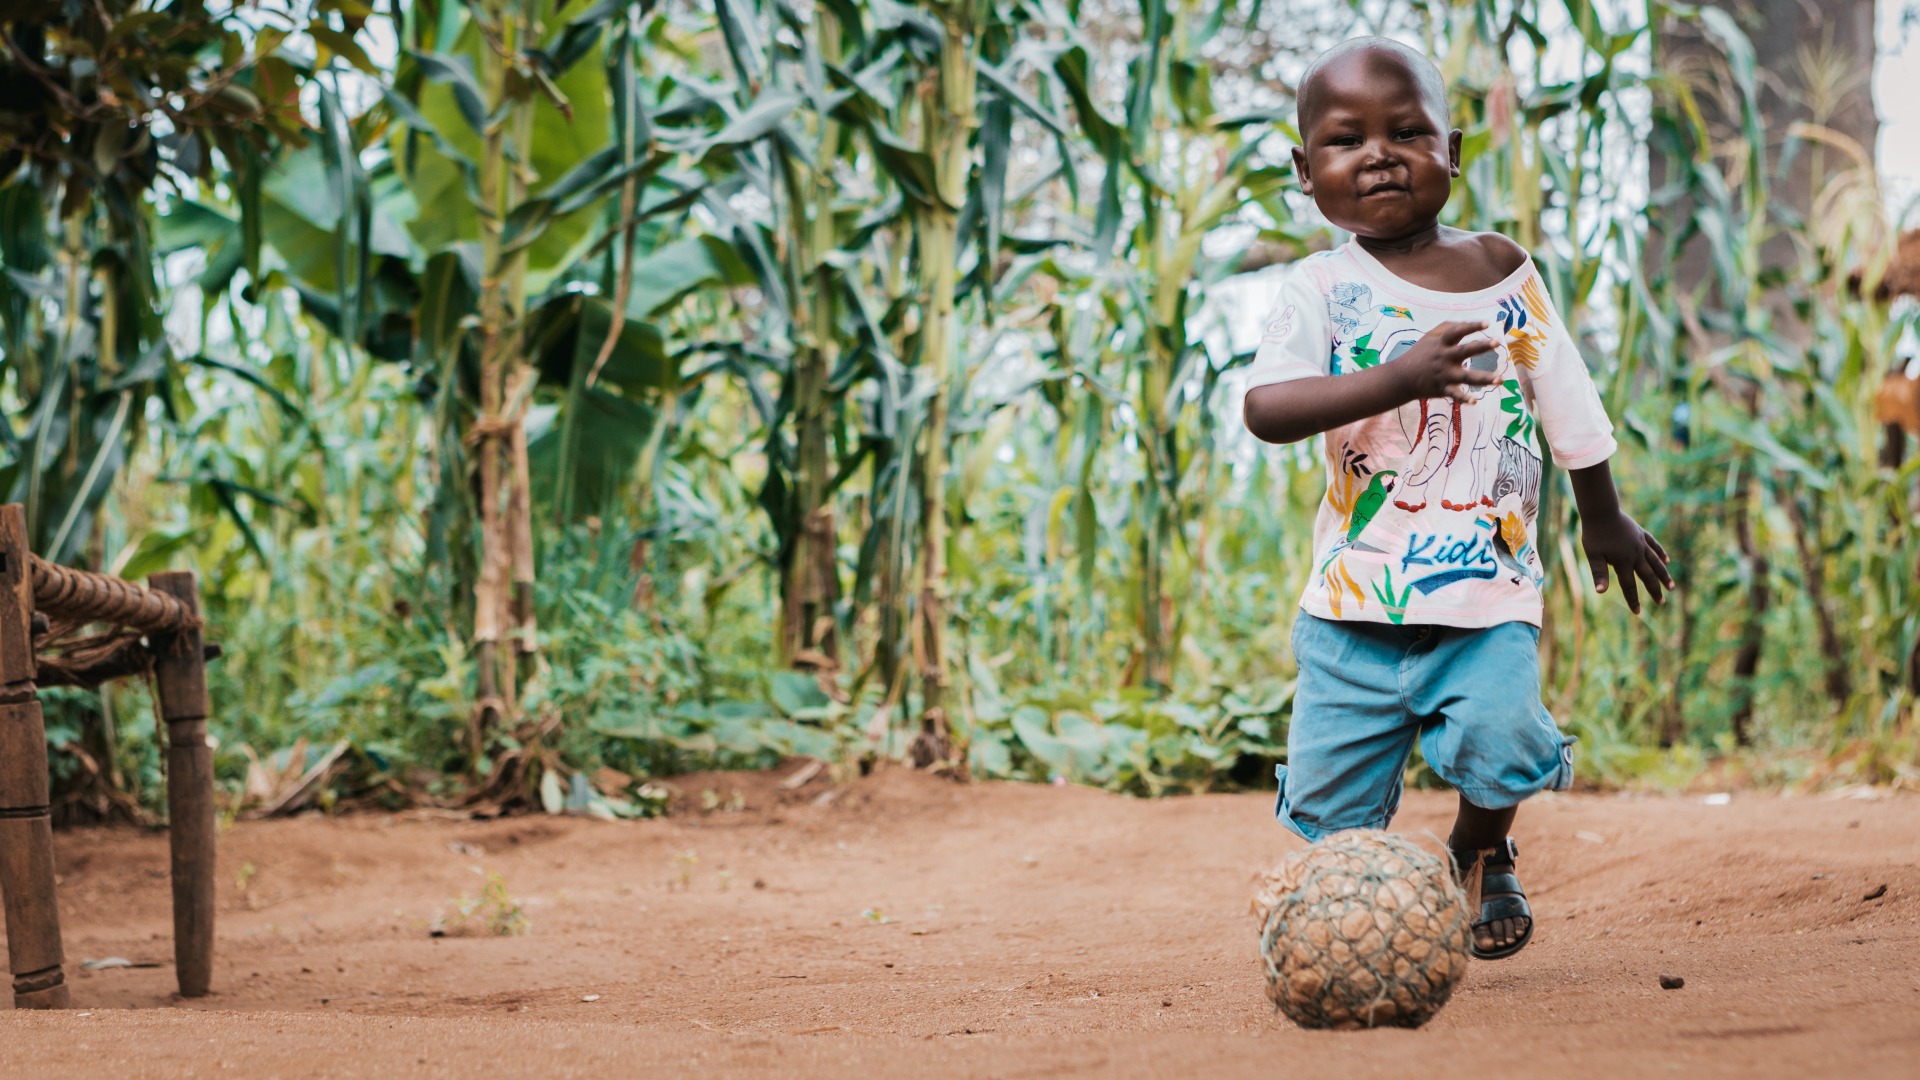 Rodrick, 4, plays with a ball at his grandparents' home.